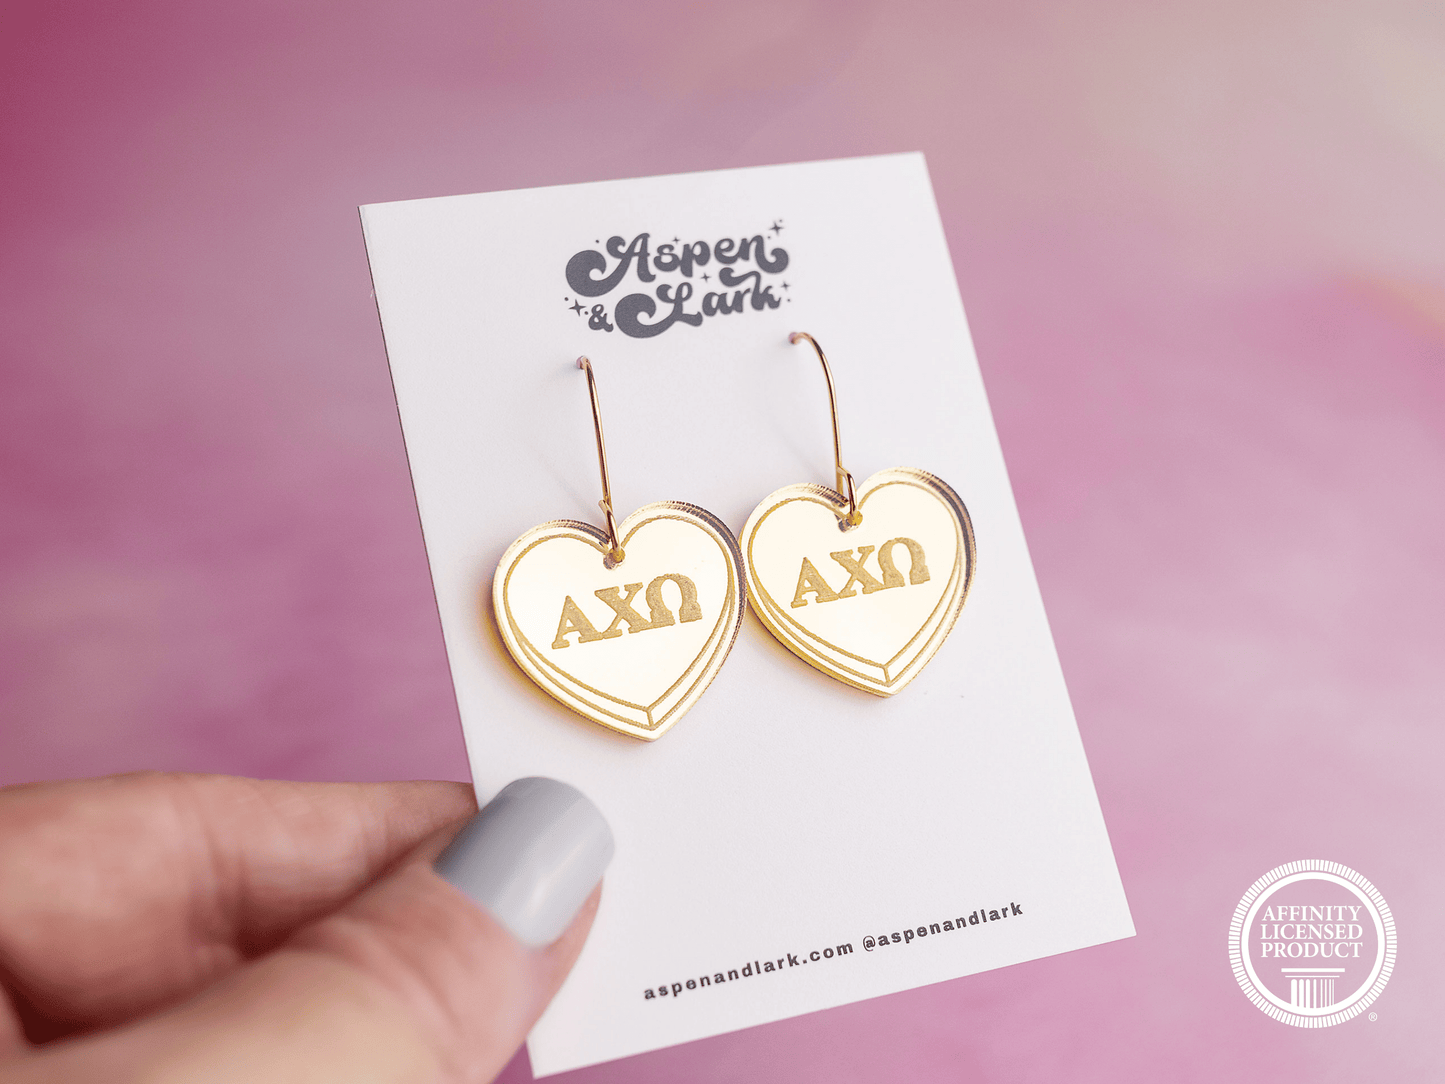 Alpha Chi Omega Earrings - Sorority Earrings - Mirror Conversation Hearts in Gold Pink or Silver